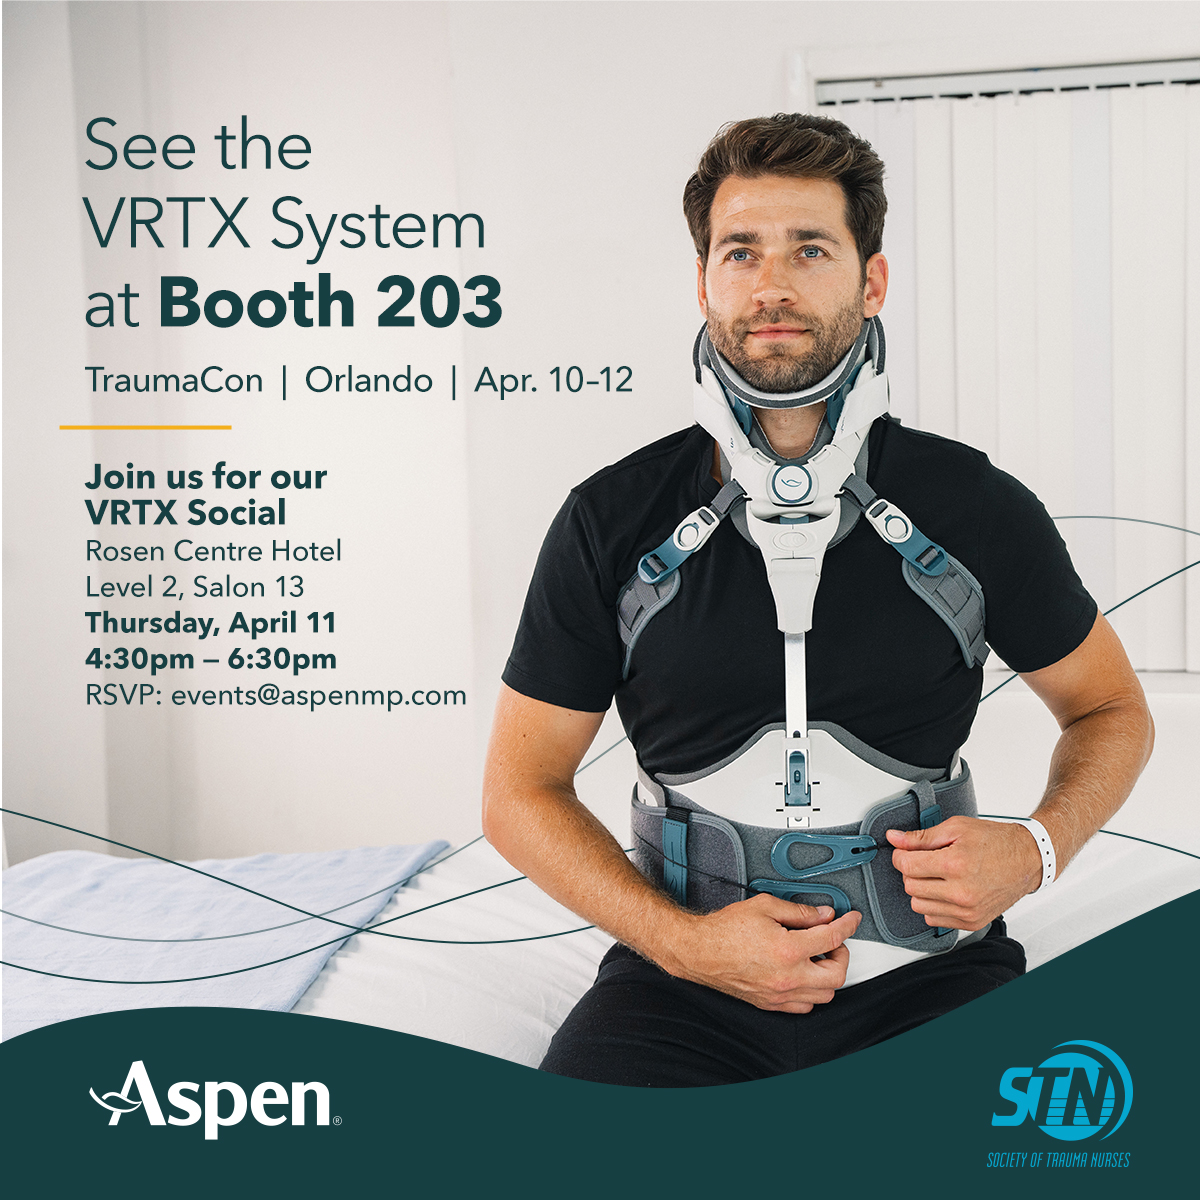 Come stop by booth 203 at STN to learn more about the VRTX System’s transformative impact on patient outcomes and efficiencies in the hospital. You can also dive deeper into its capabilities at our VRTX Social. Please RSVP to events@aspenmp.com to reserve your spot.